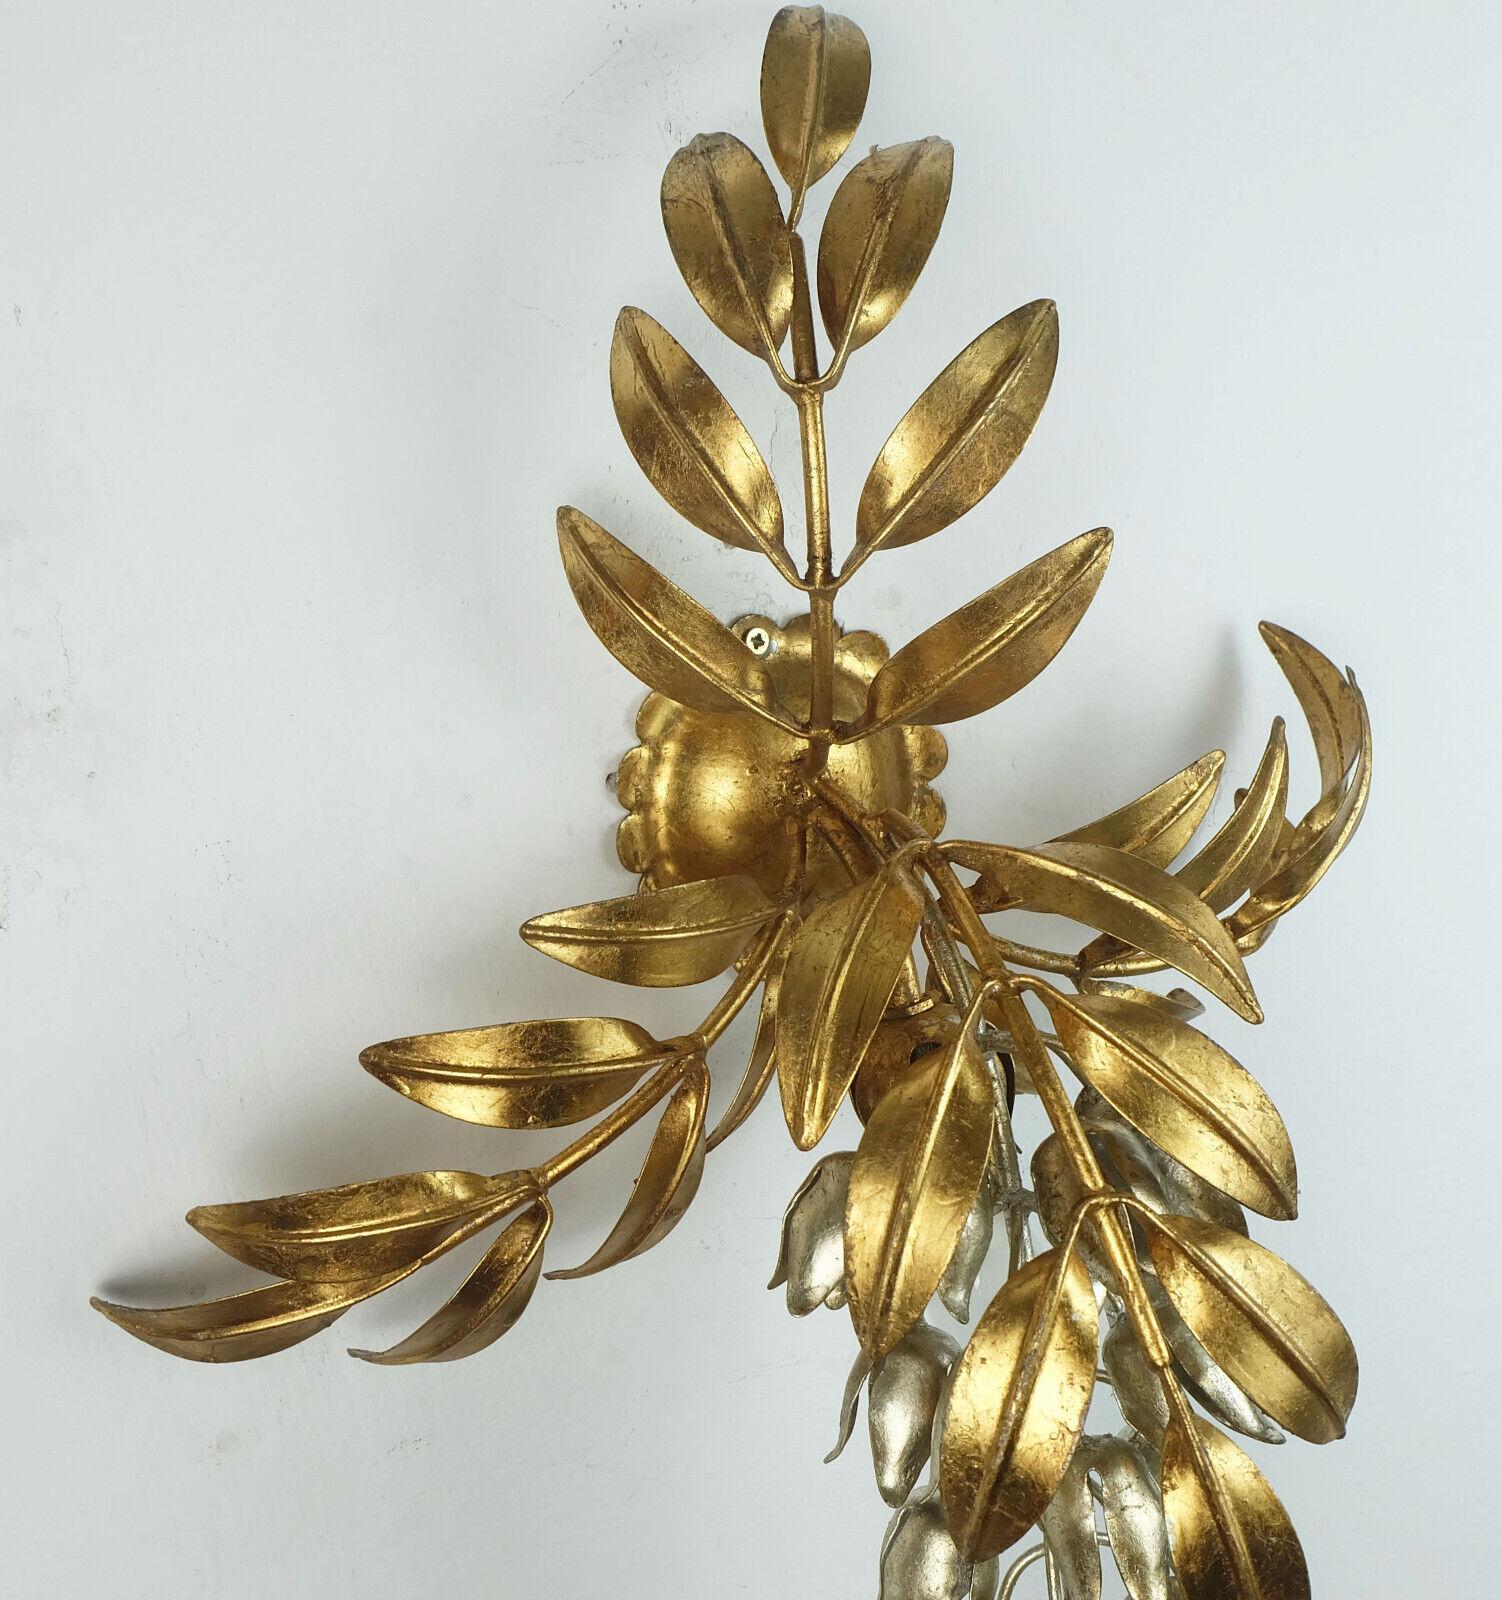 hans koegl vintage florentine WALL LAMP sconce metal pioggia d'oro hollywood reg In Good Condition For Sale In Mannheim, DE